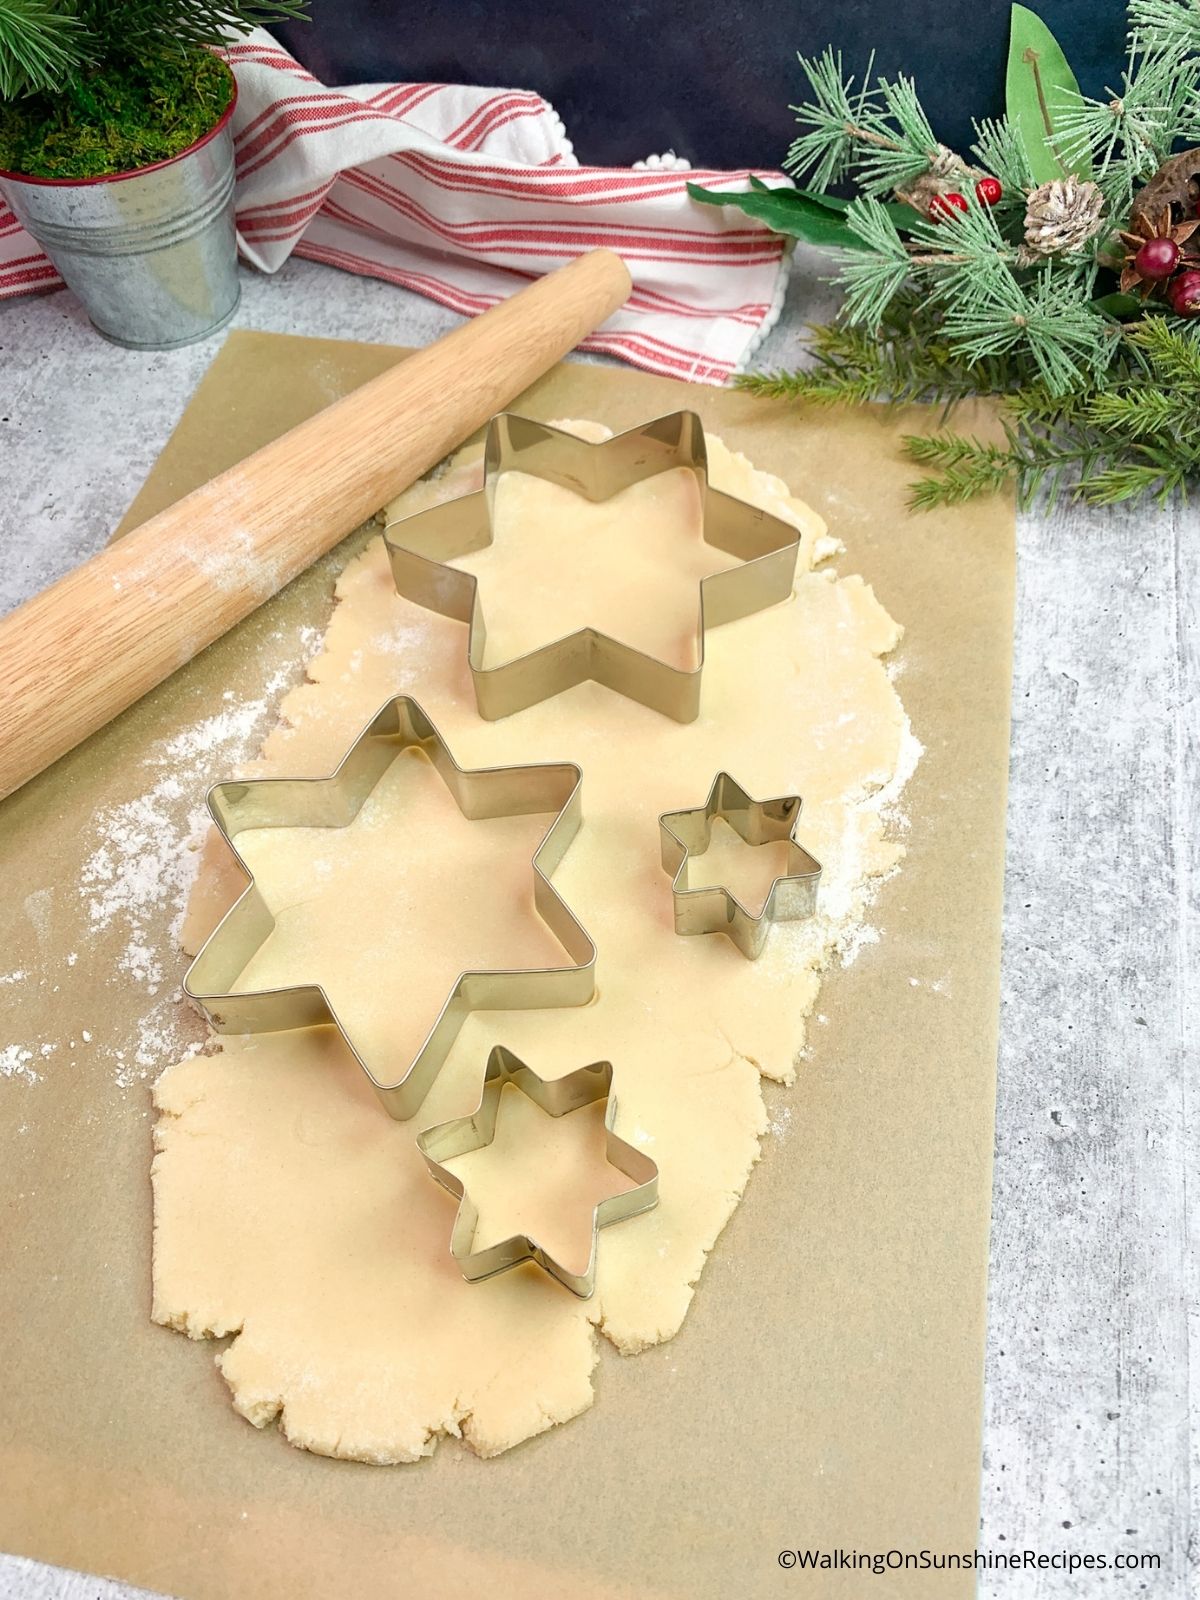 cut shapes of Christmas trees in the dough.